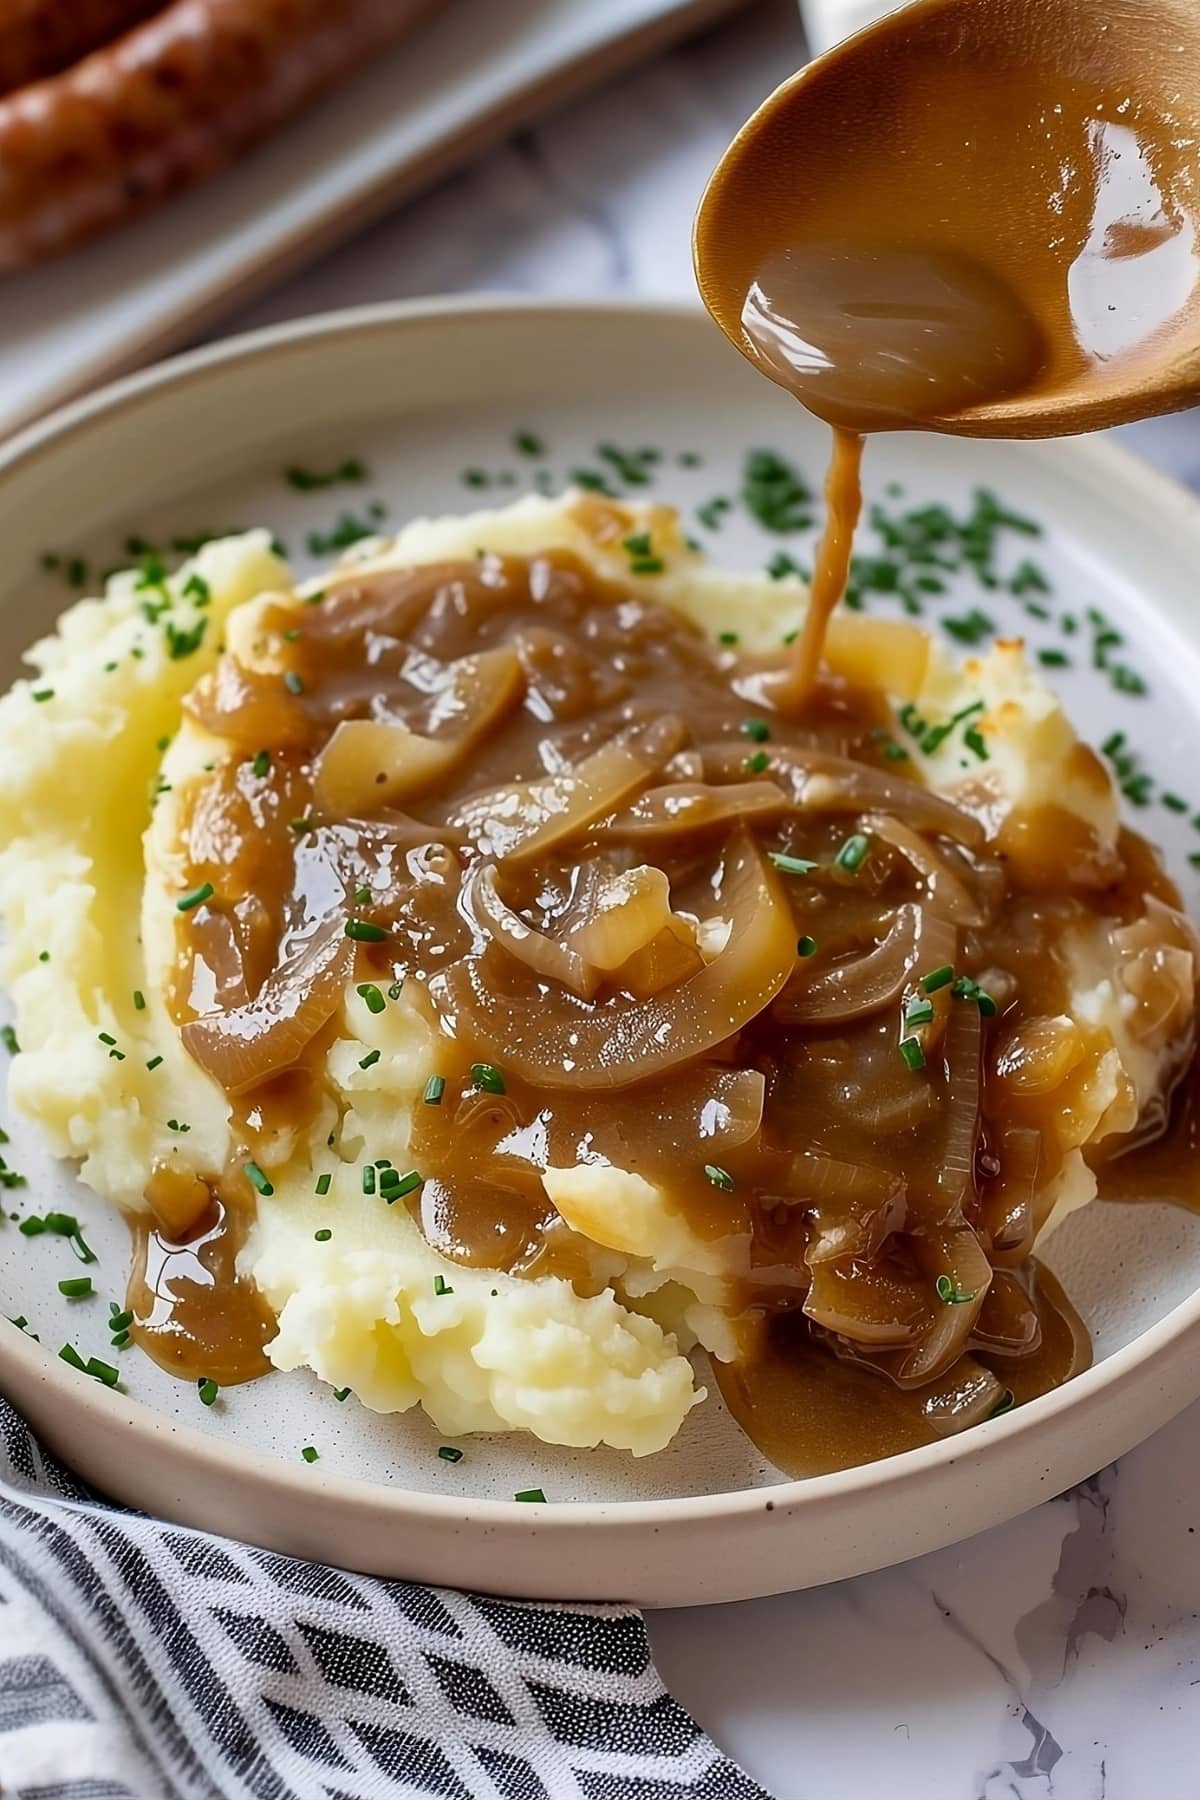 Mashed potato poured with onion gravy, sausage in plate in the background.